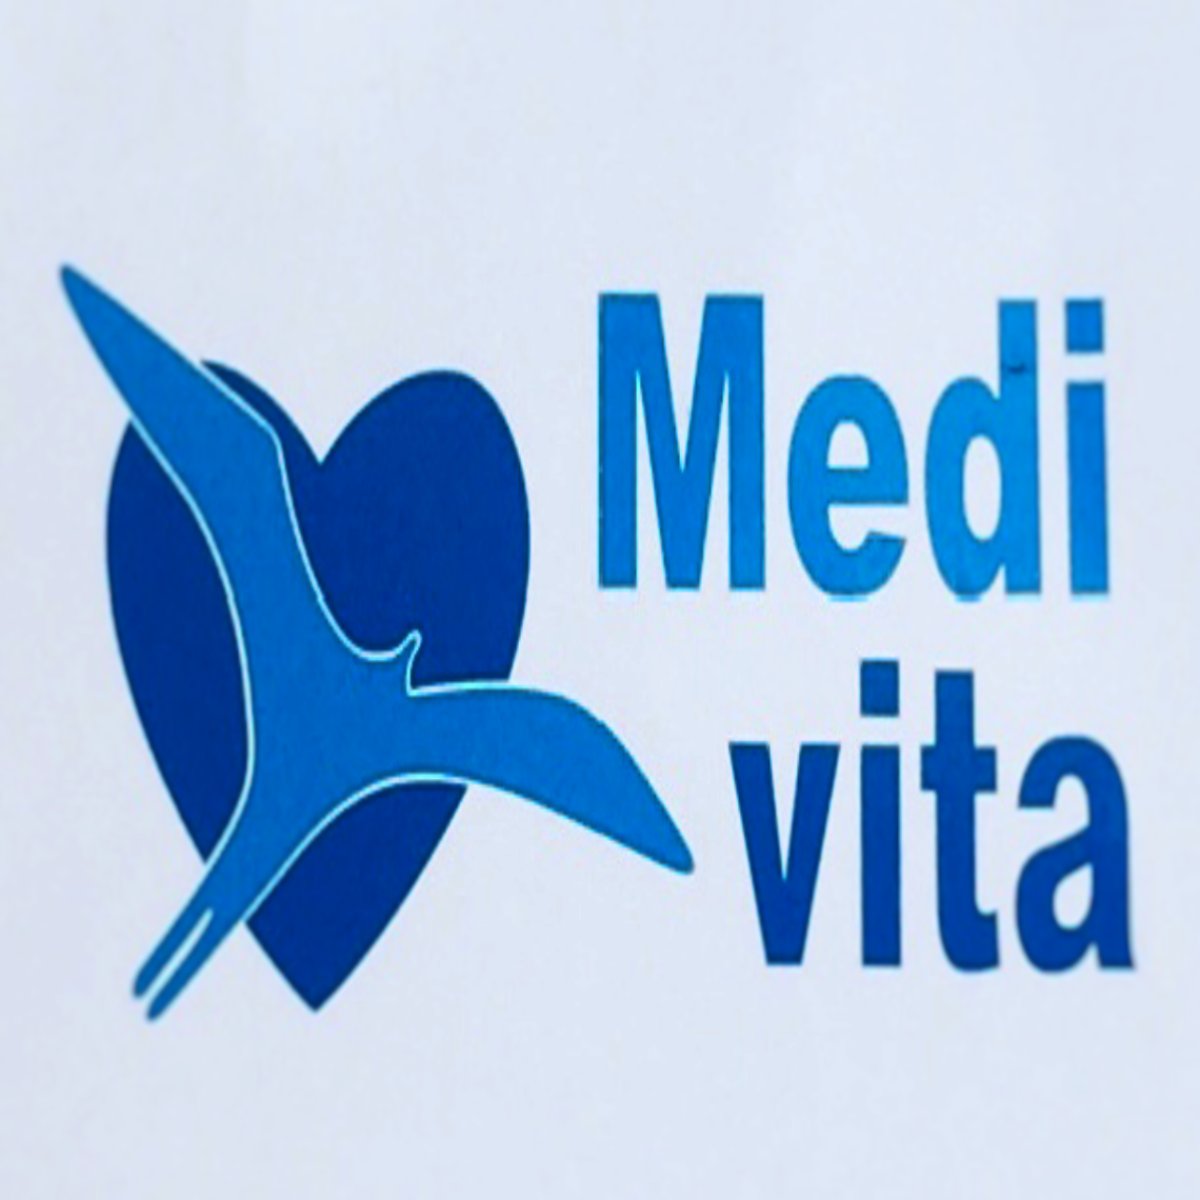 Remember!
Occupational medicine is the medical specialty that cares for workers’ health and safety.
Join us today⬇️
medivita.waw.pl
#occupationalmedicine #workershealth #Health #HealthcareInnovation #HealthyLifestyle #MedicalNews #Warsaw